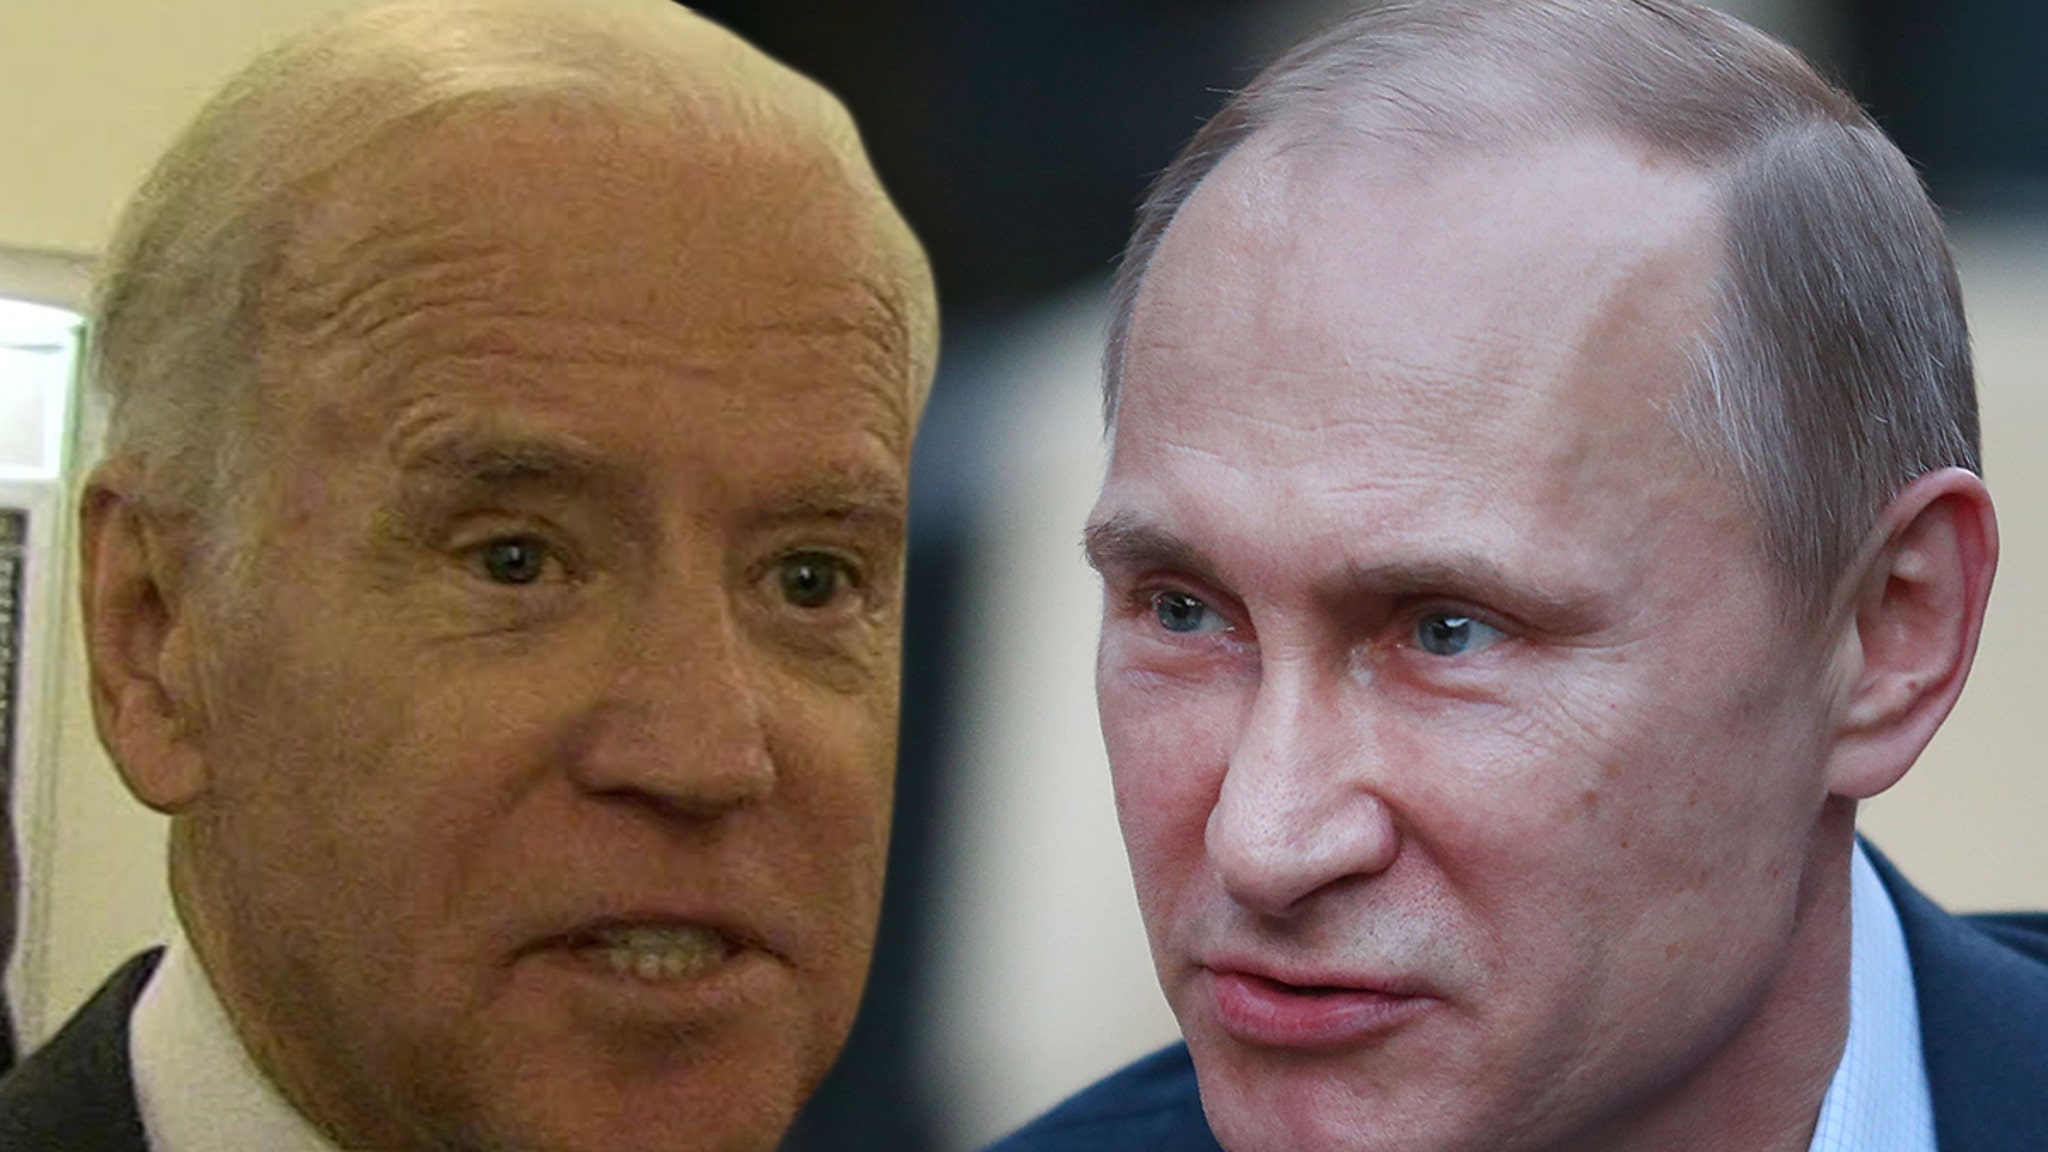 Pres. Biden Apparently Suggests Removing Putin, White House Backtracks